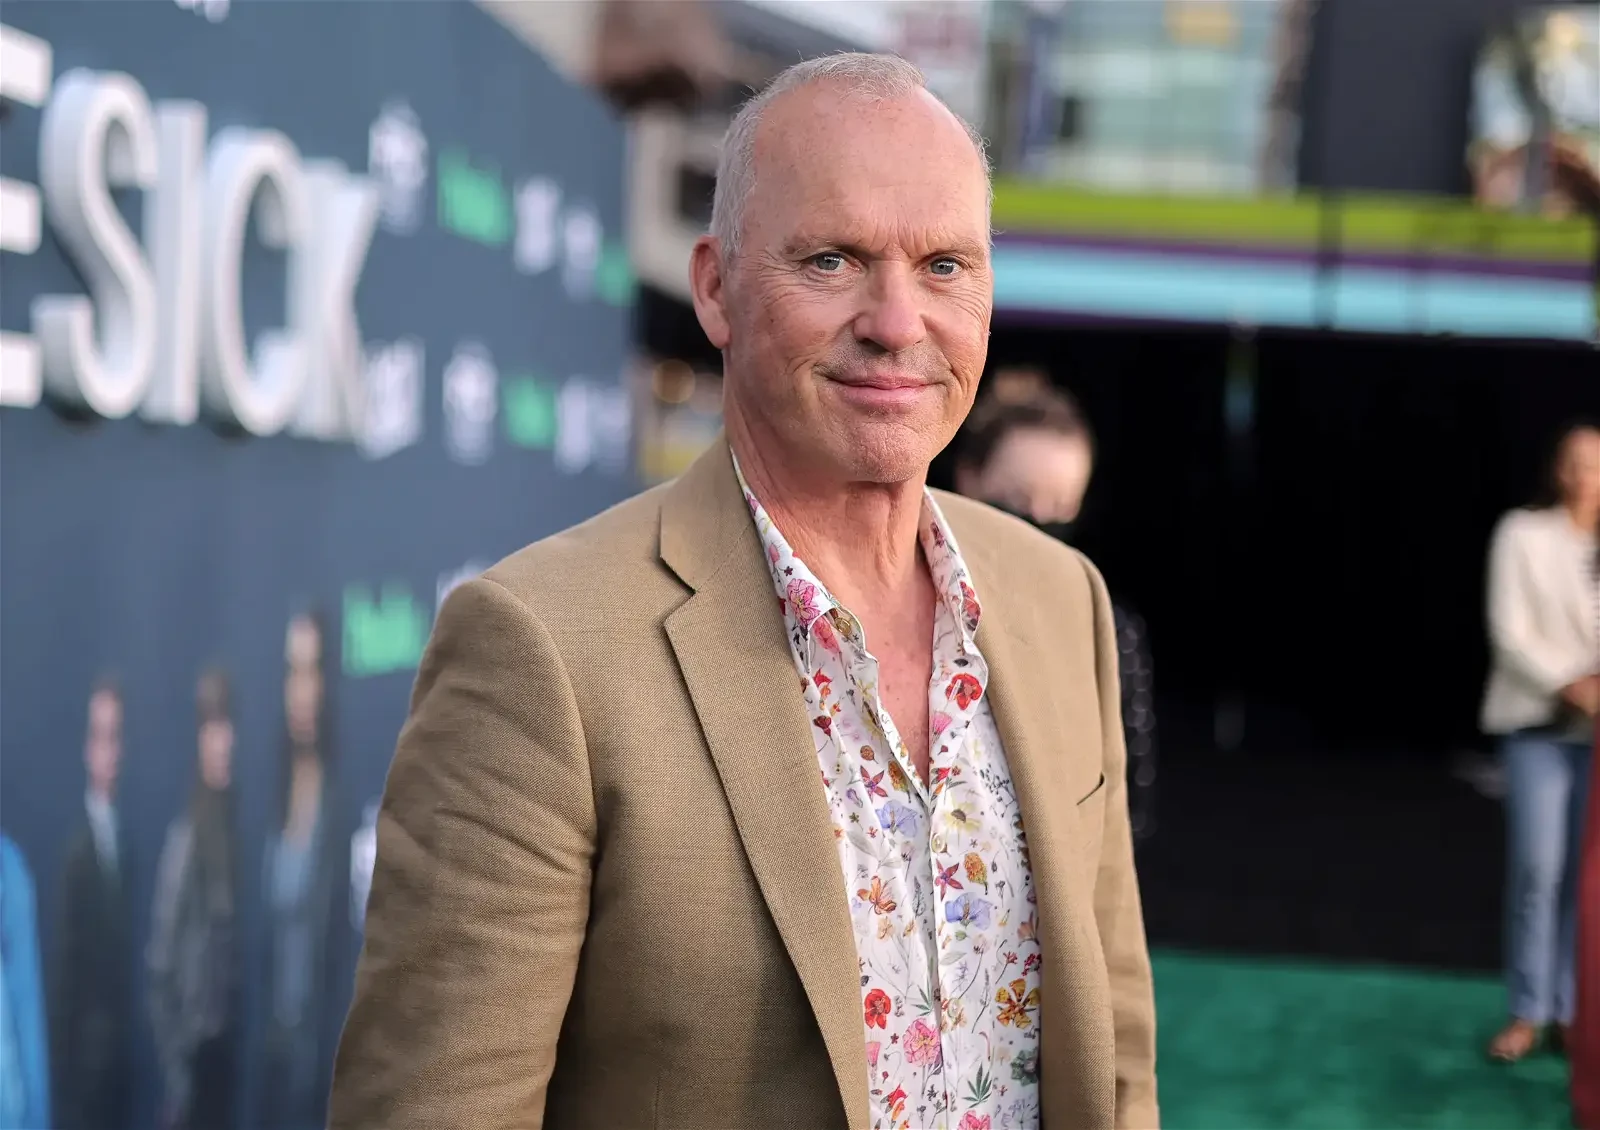 Michael Keaton at an event